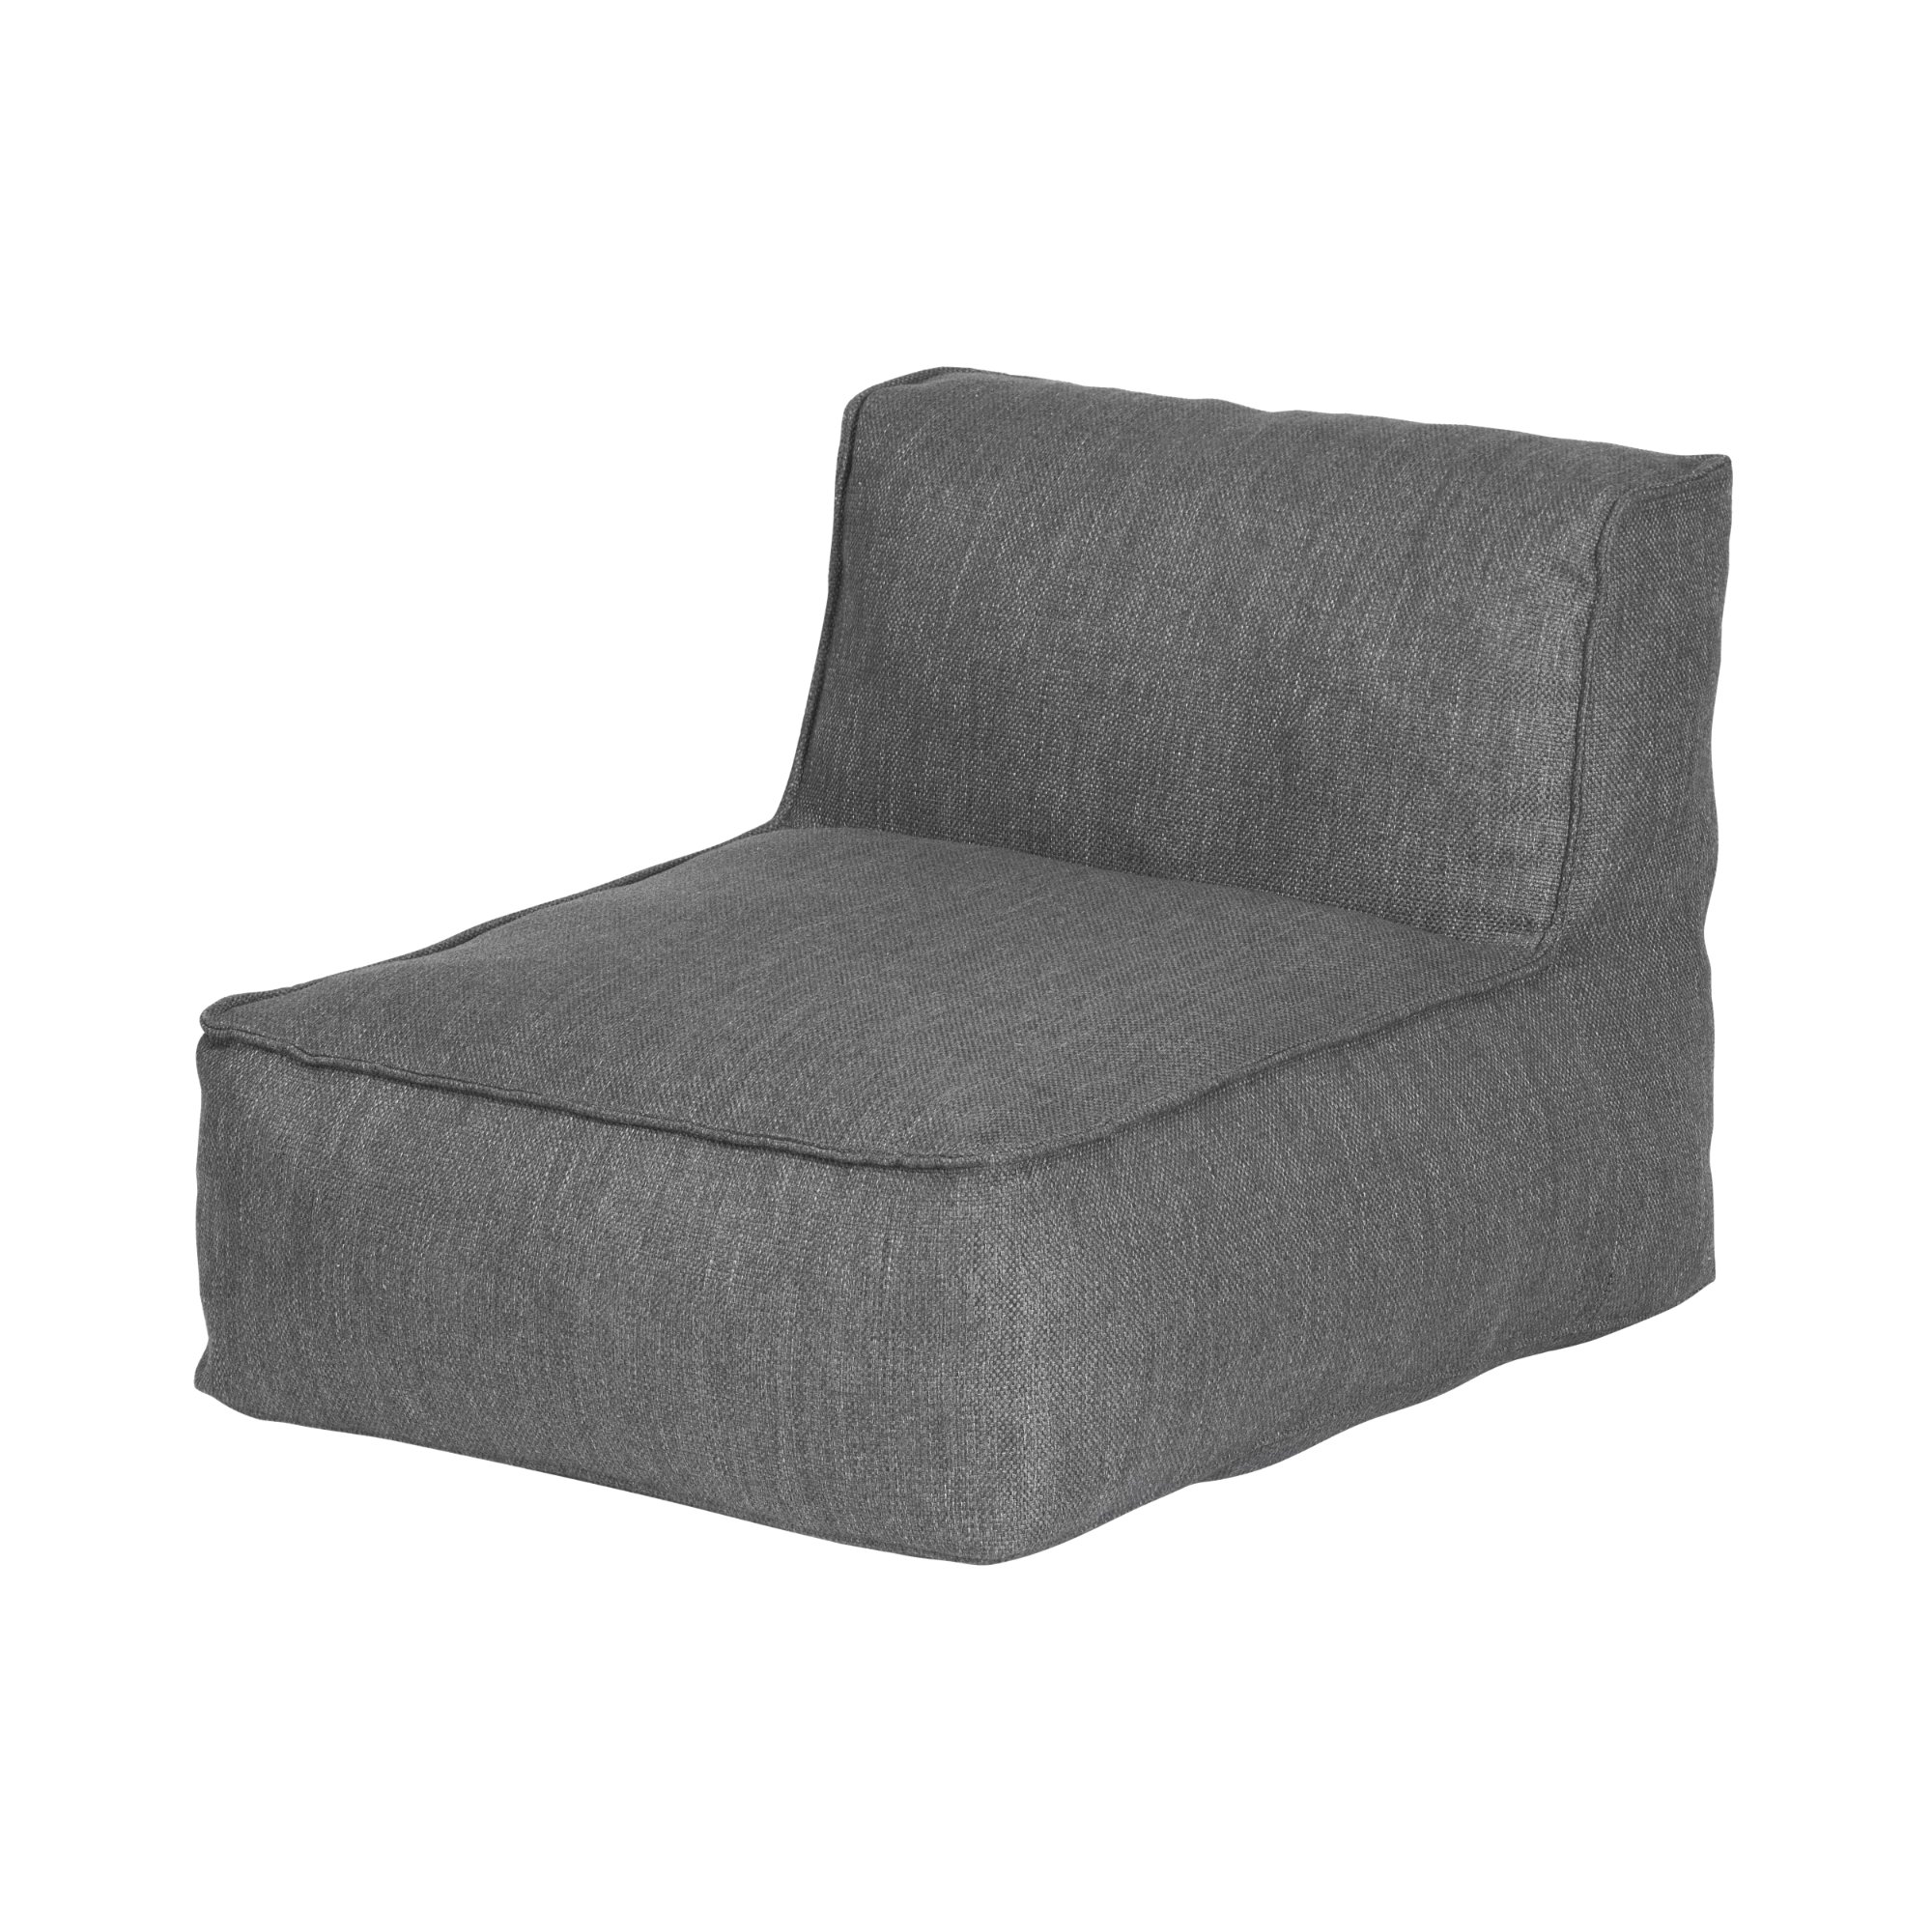 BLOMUS // GROW - OUTDOOR 1-SEATER | CHARCOAL